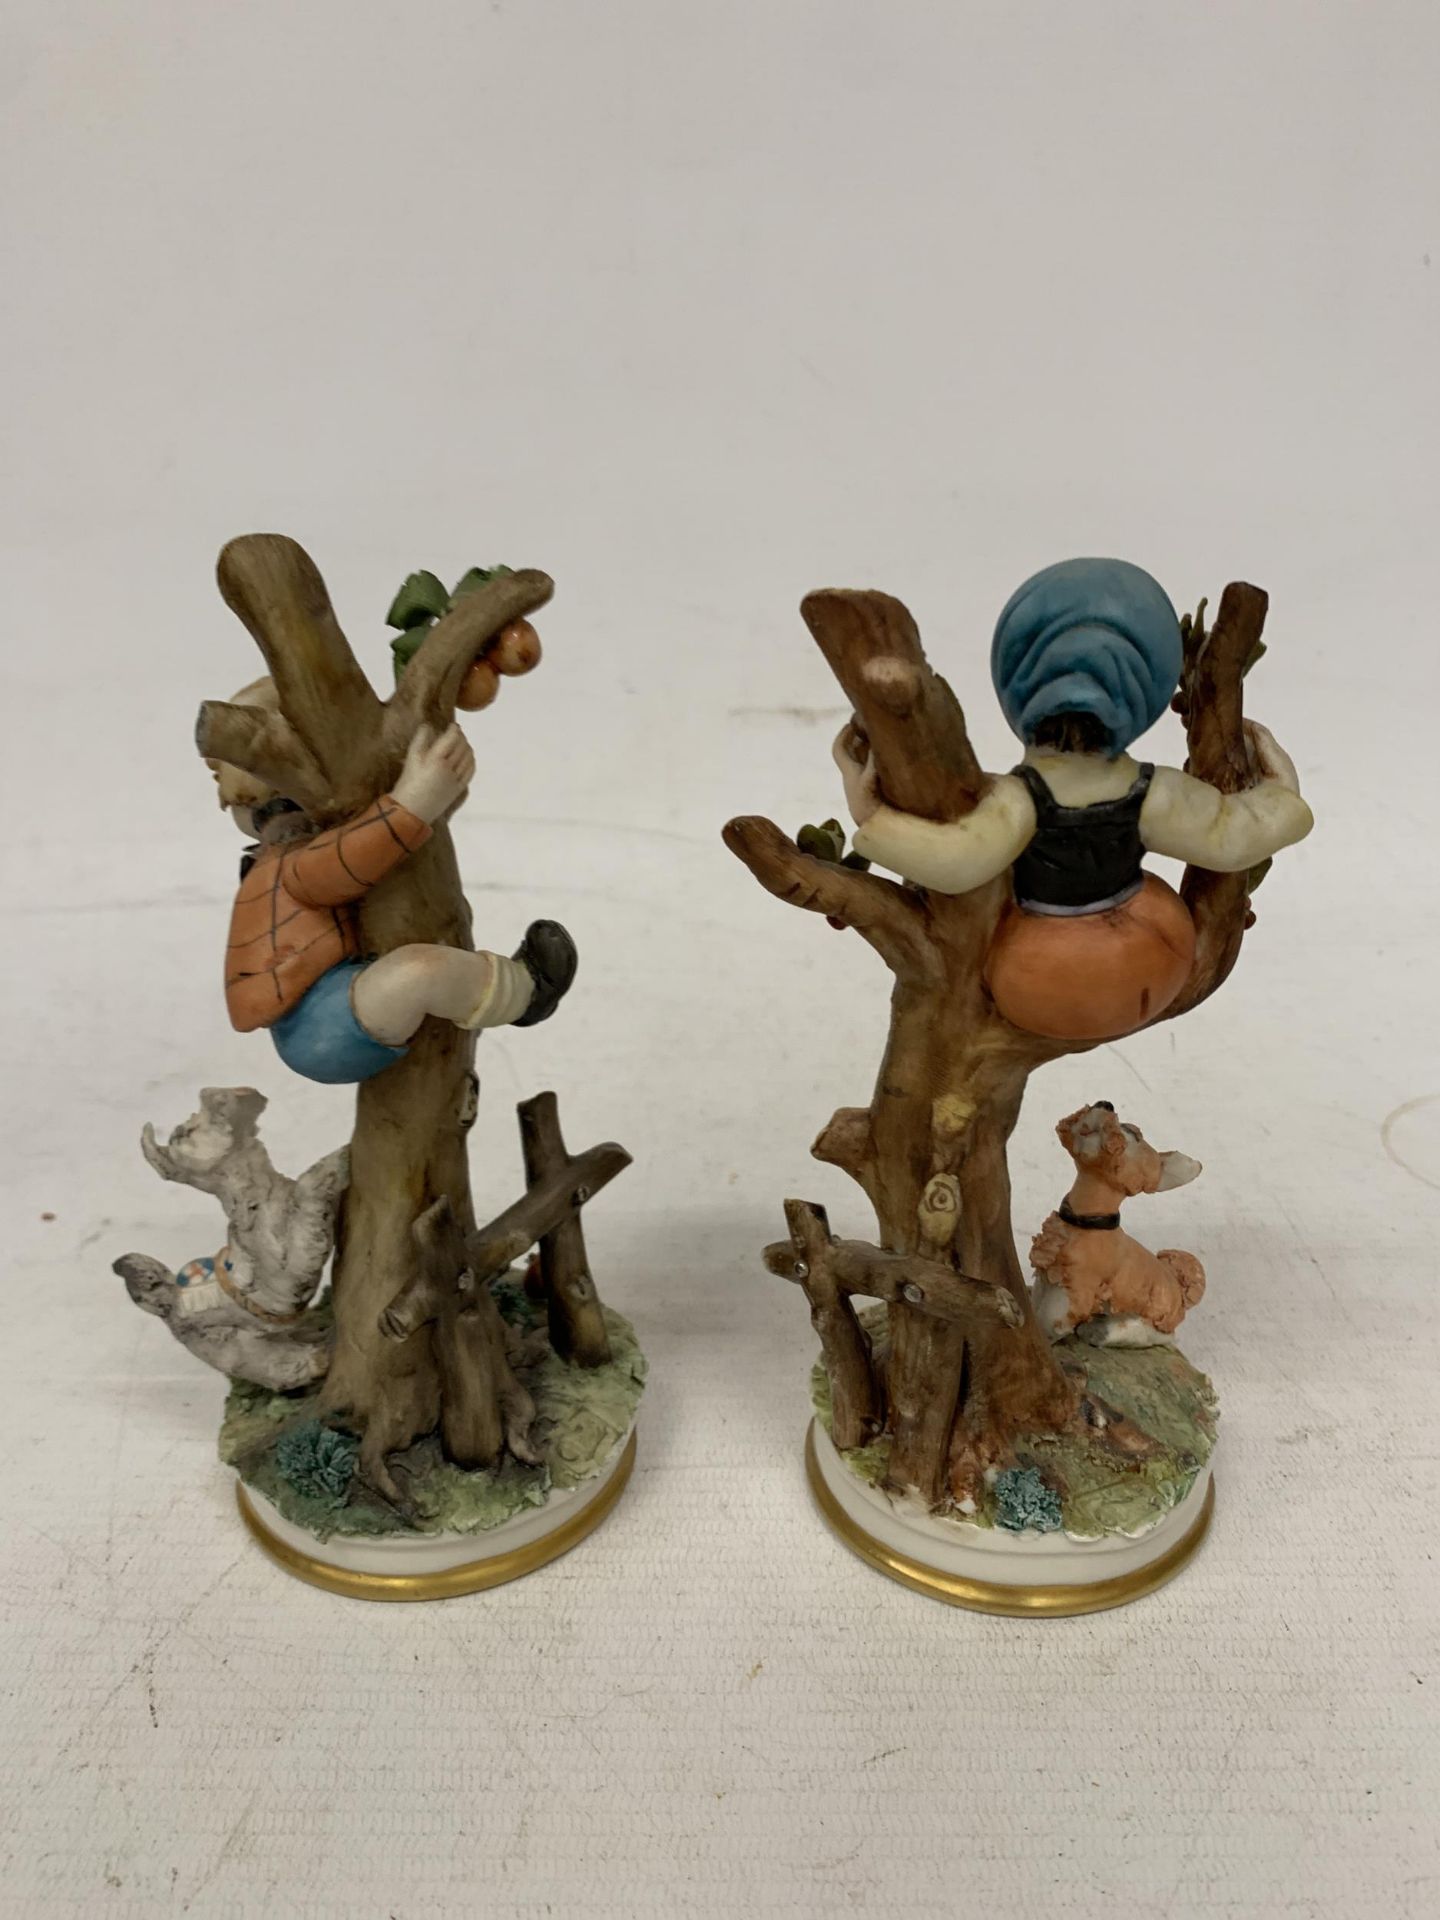 TWO CAPODIAMONTE FIGURES OF A GIRL AND A BOY IN A TREE WITH A DOG BARKING BELOW - Image 2 of 4